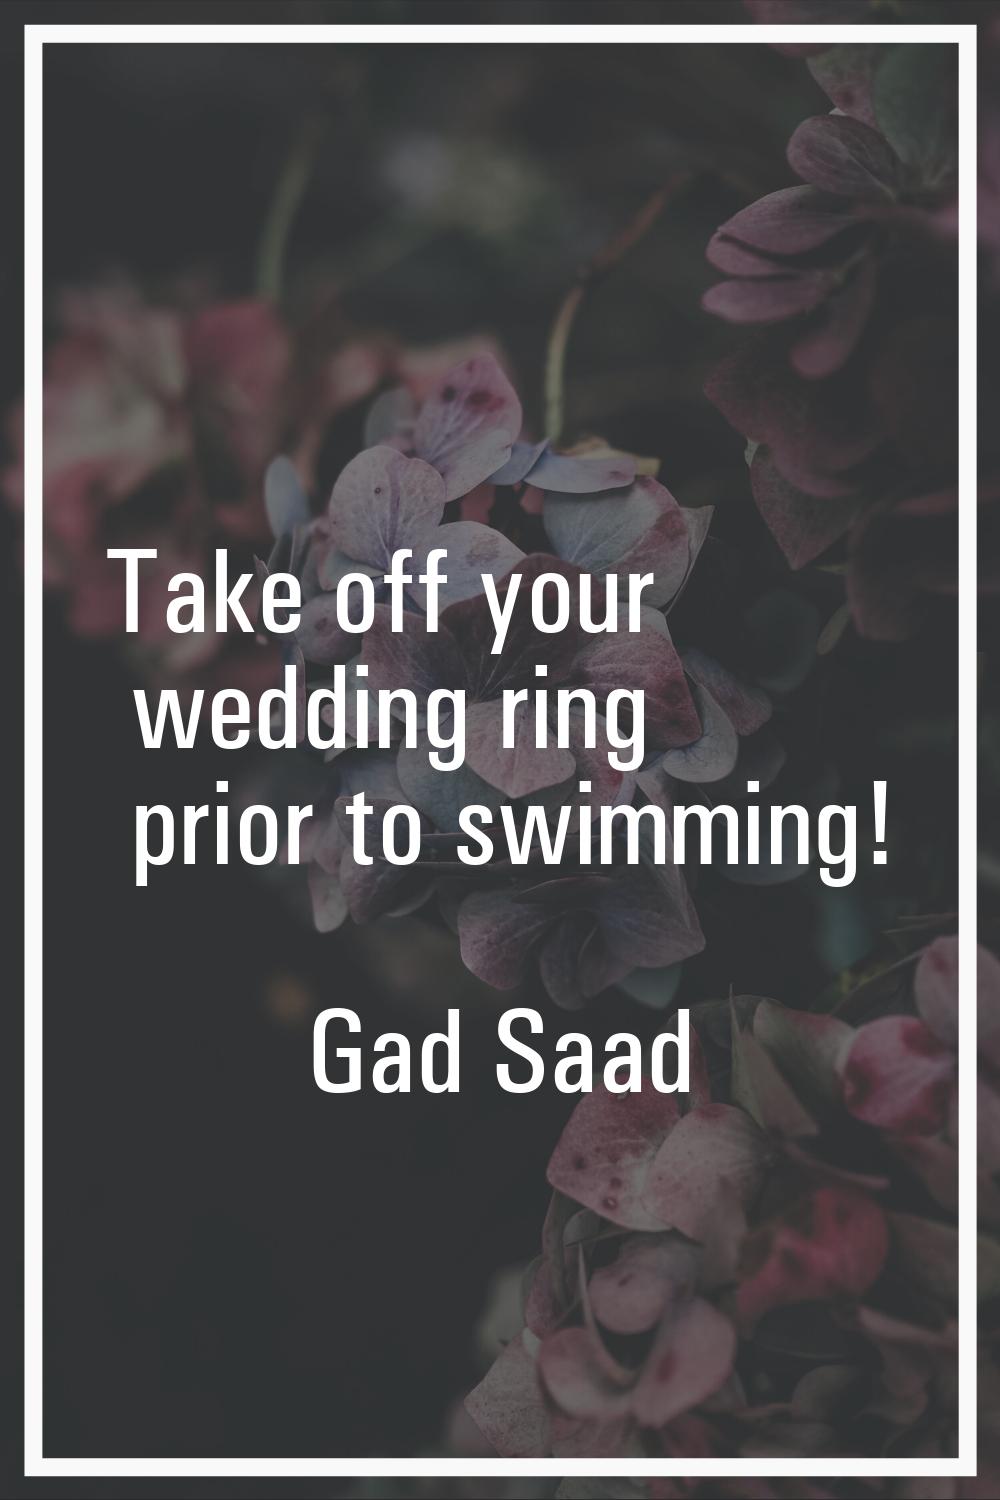 Take off your wedding ring prior to swimming!